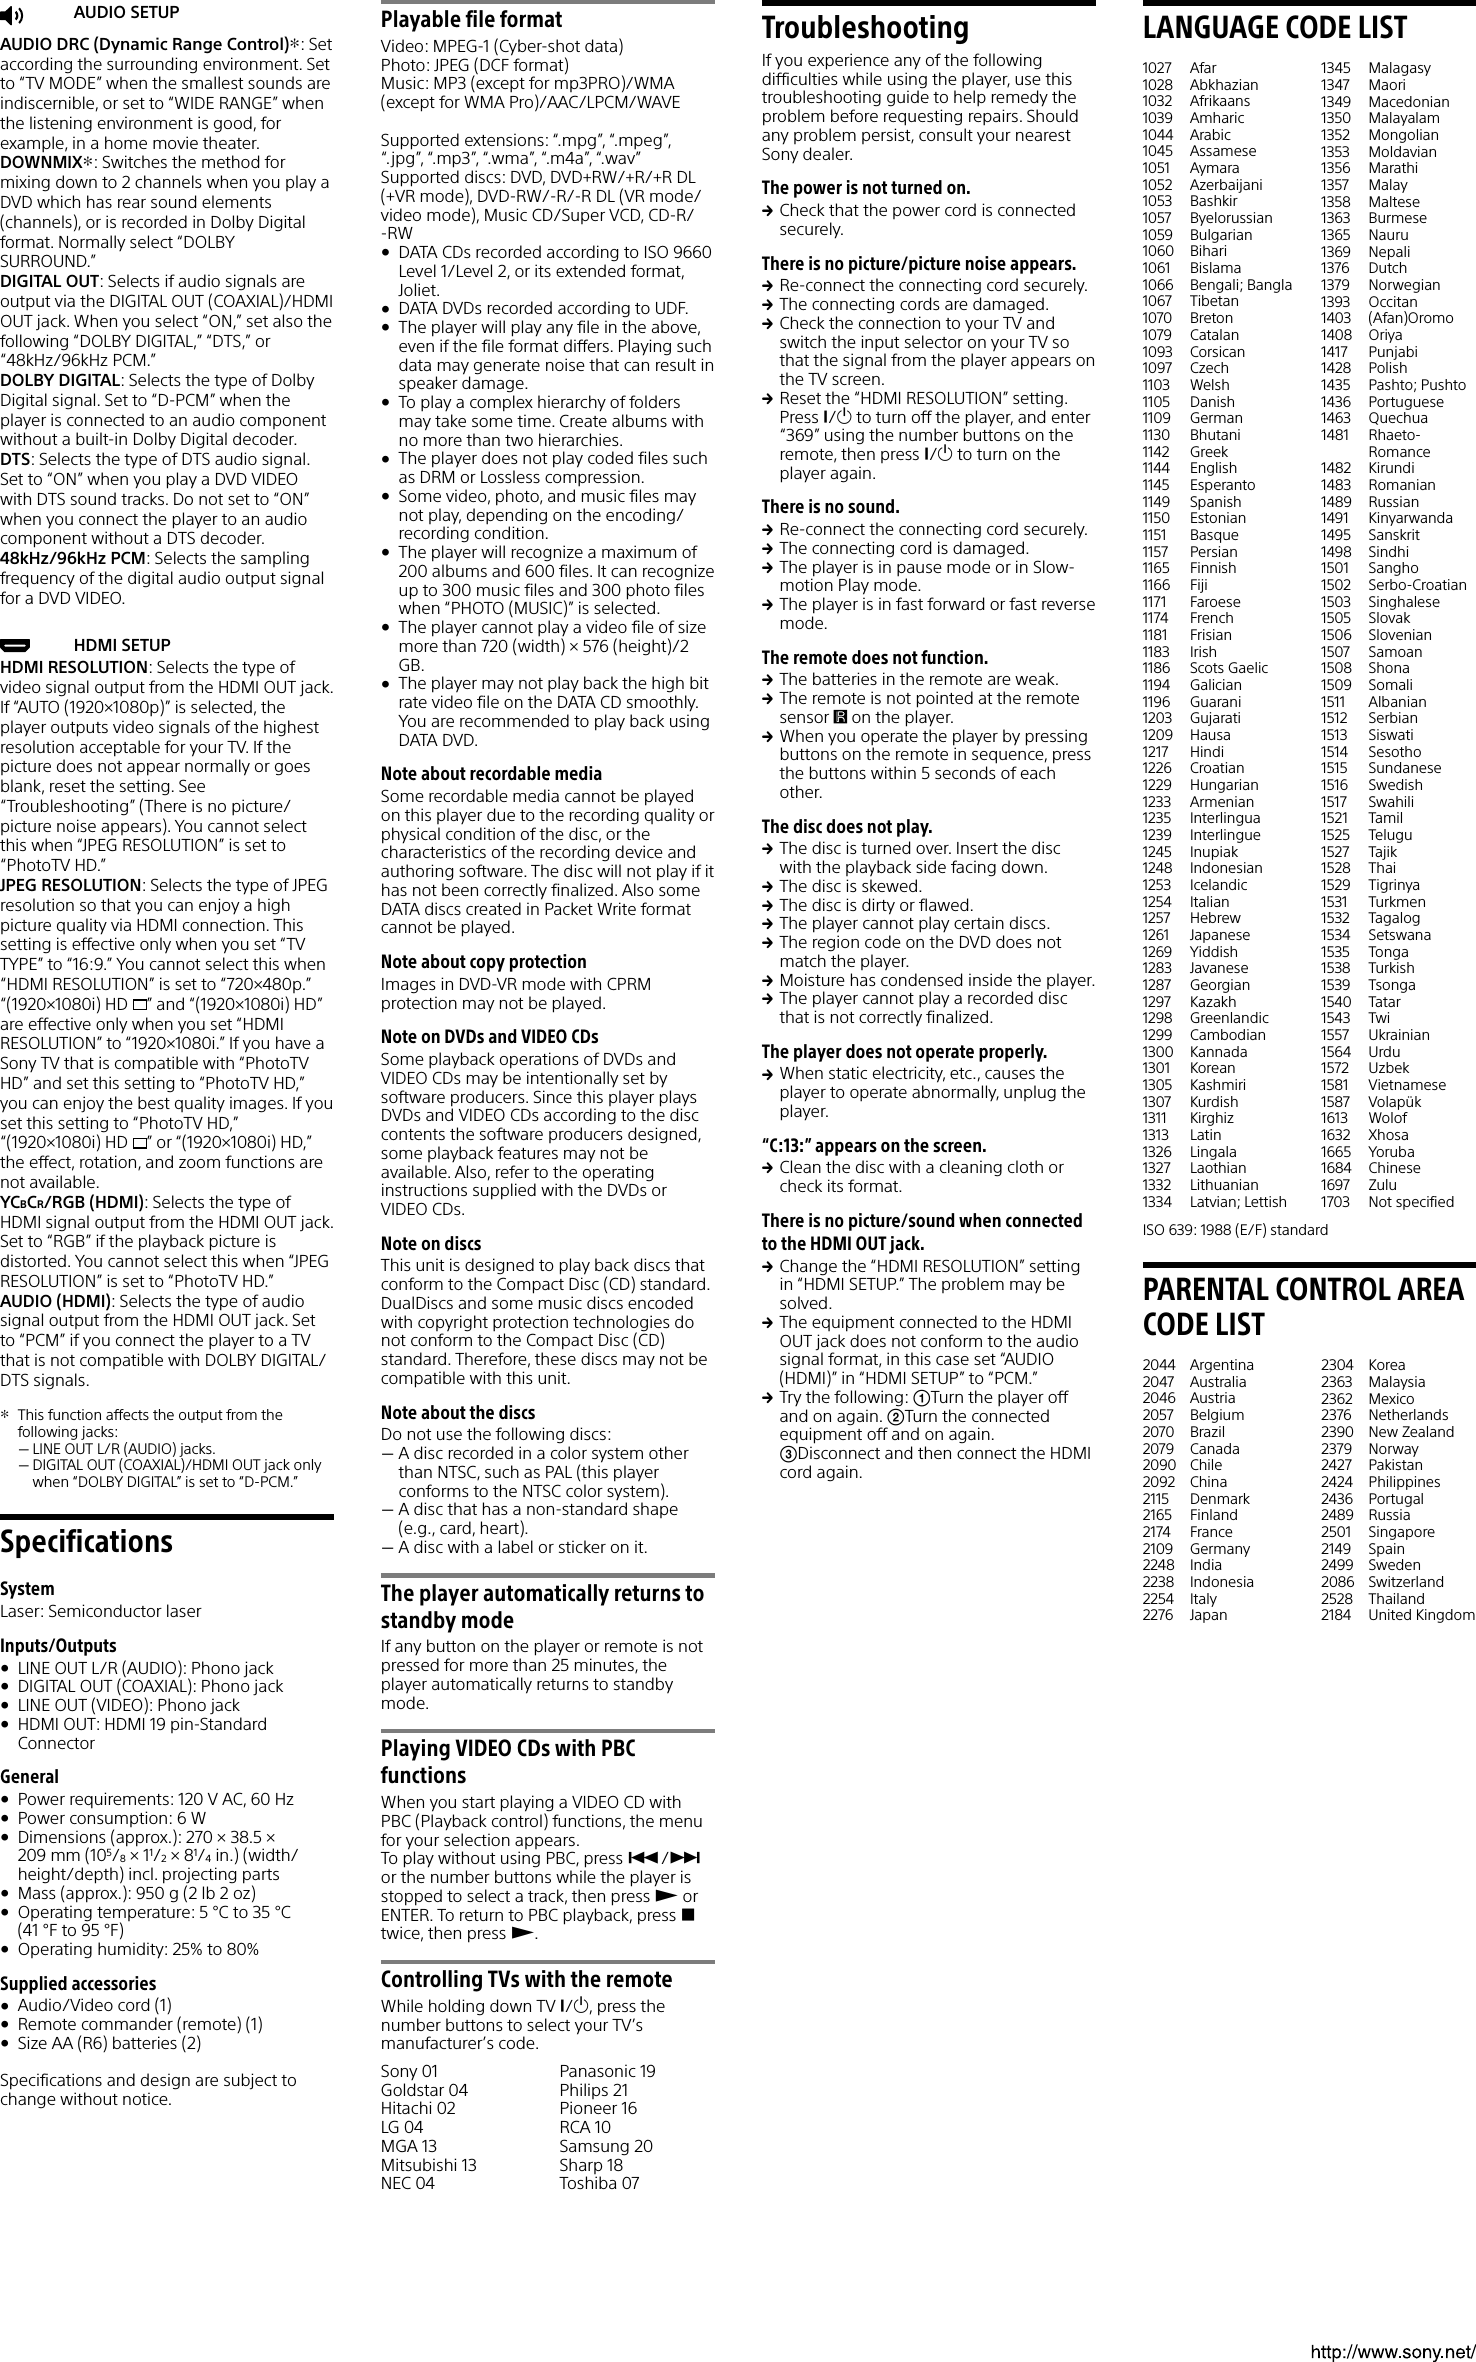 Page 2 of 2 - Sony DVP-SR510H User Manual Reference Guide DVPSR510H Refguide